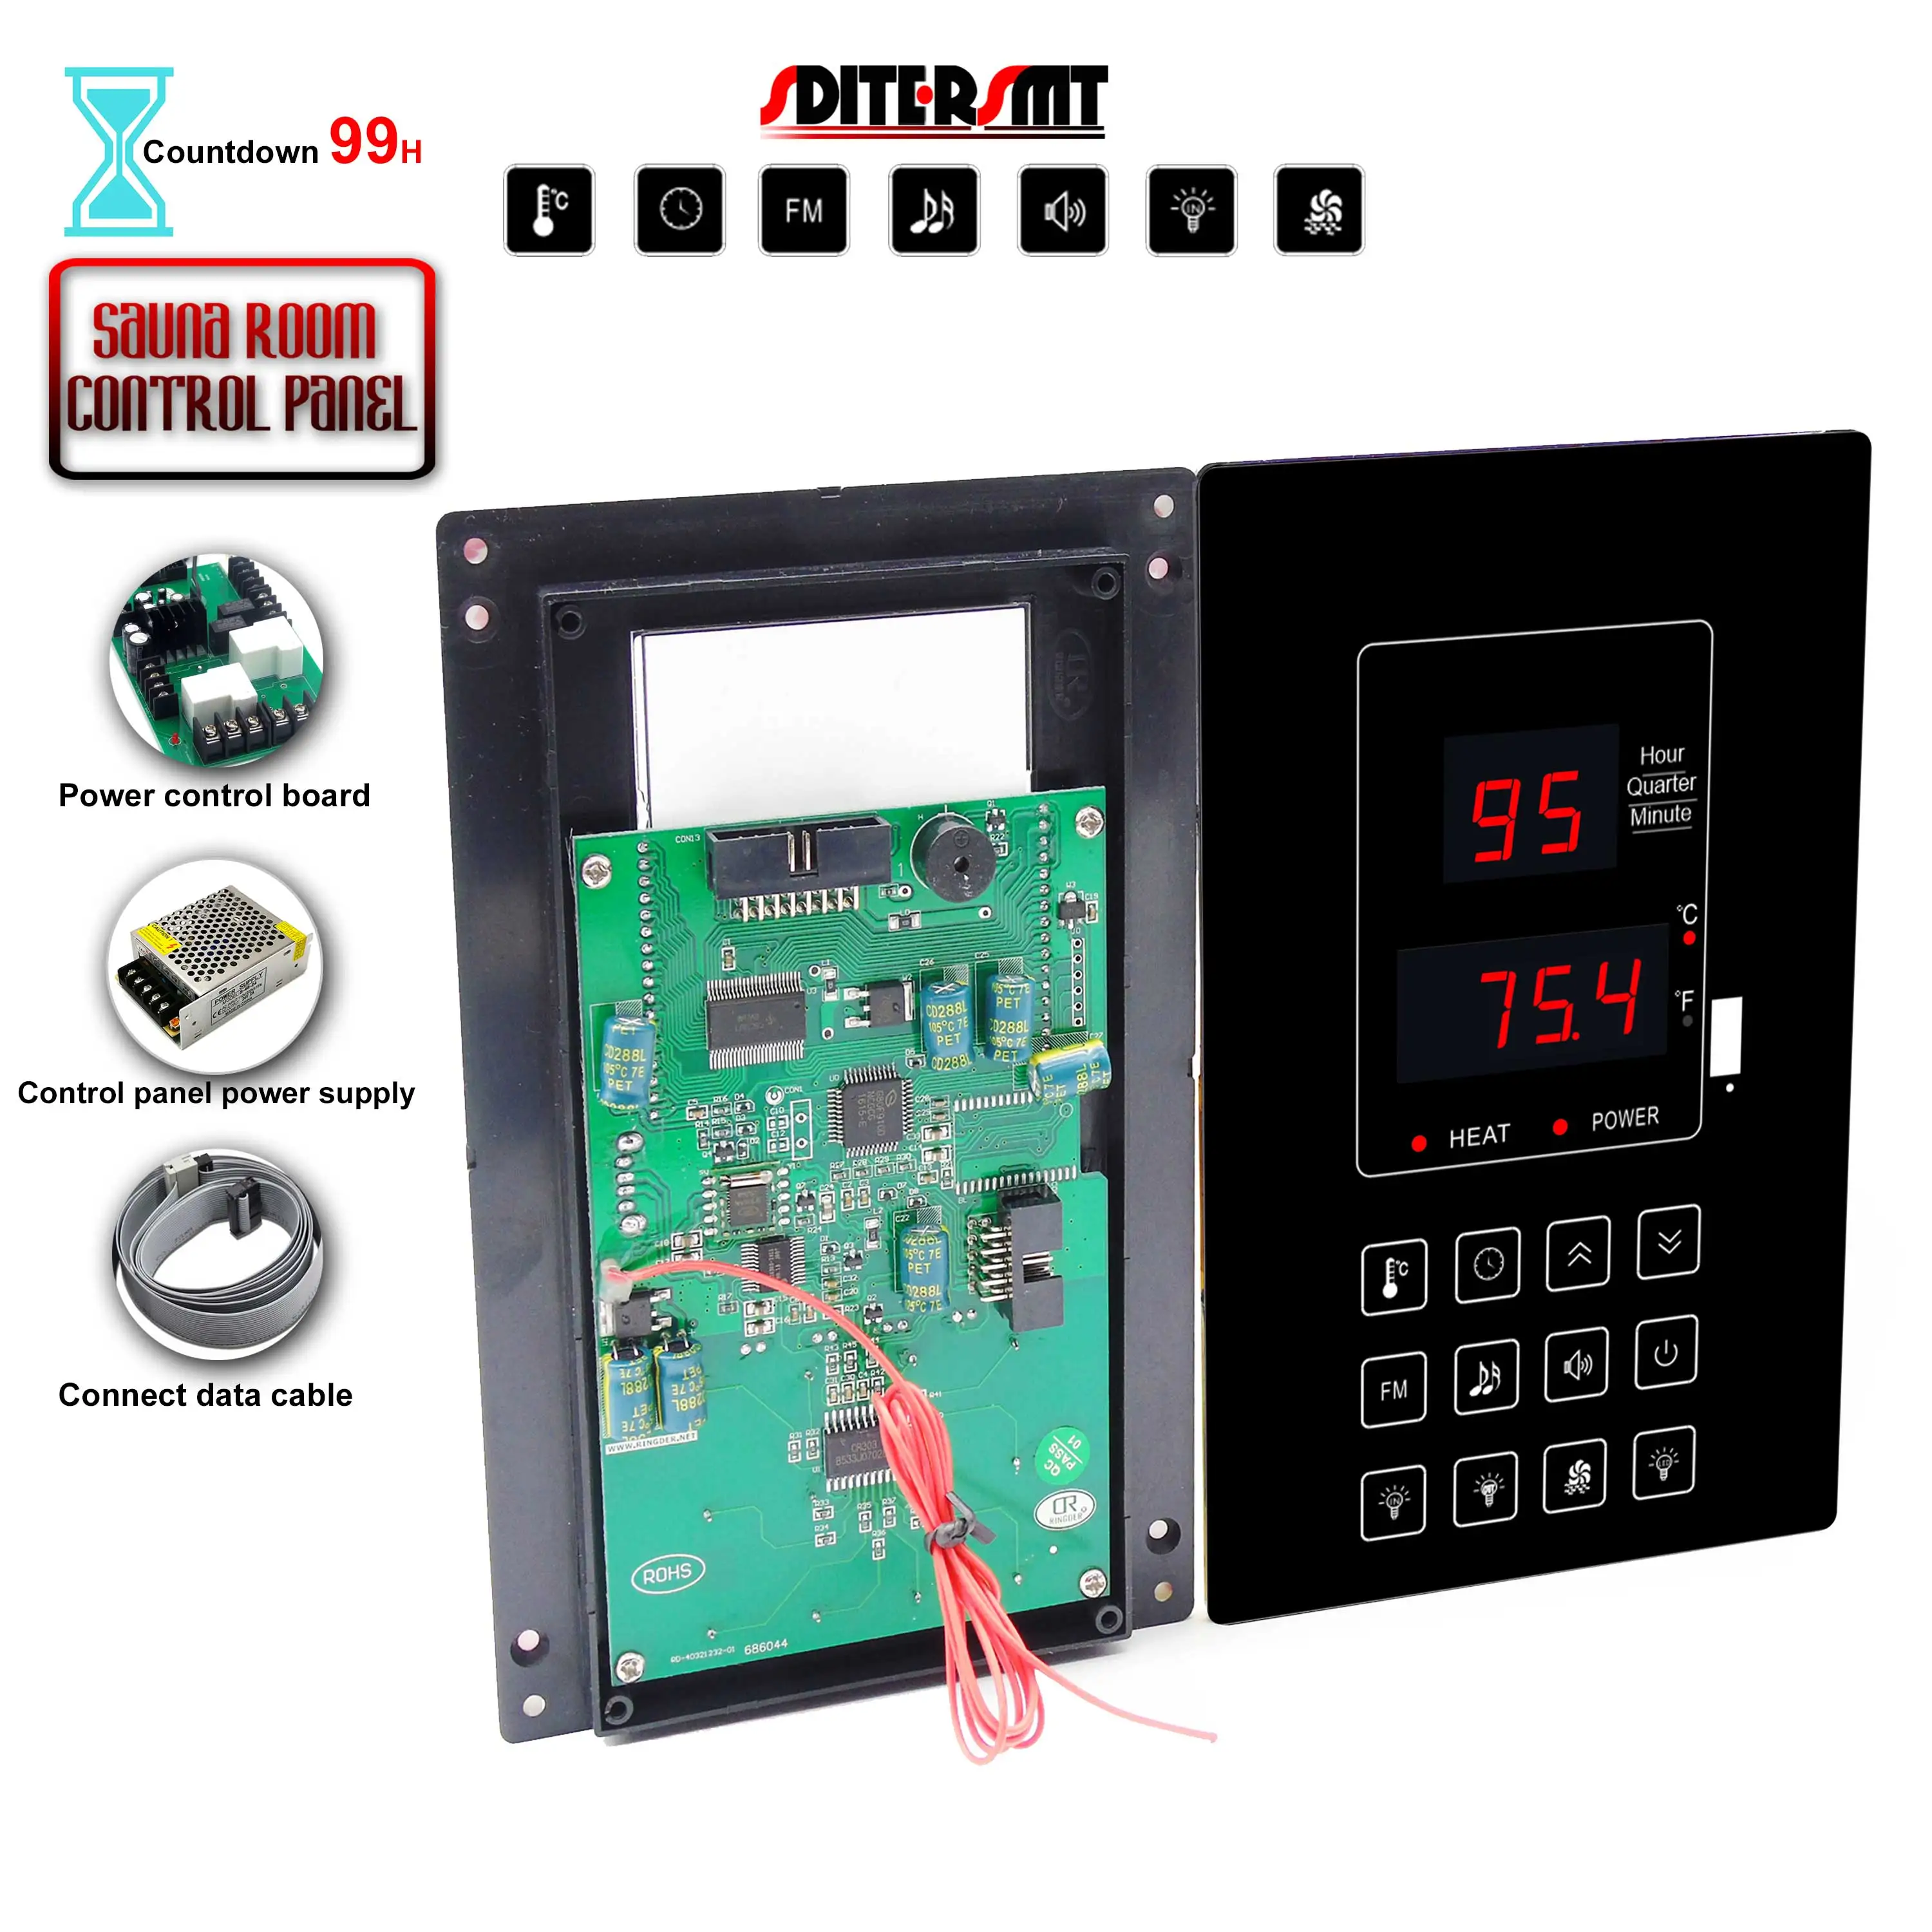 

Count-Down 99 Hour Sauna Heater Stove Control Boards for Heating Element Personal Space Heater Multi-Function Switch